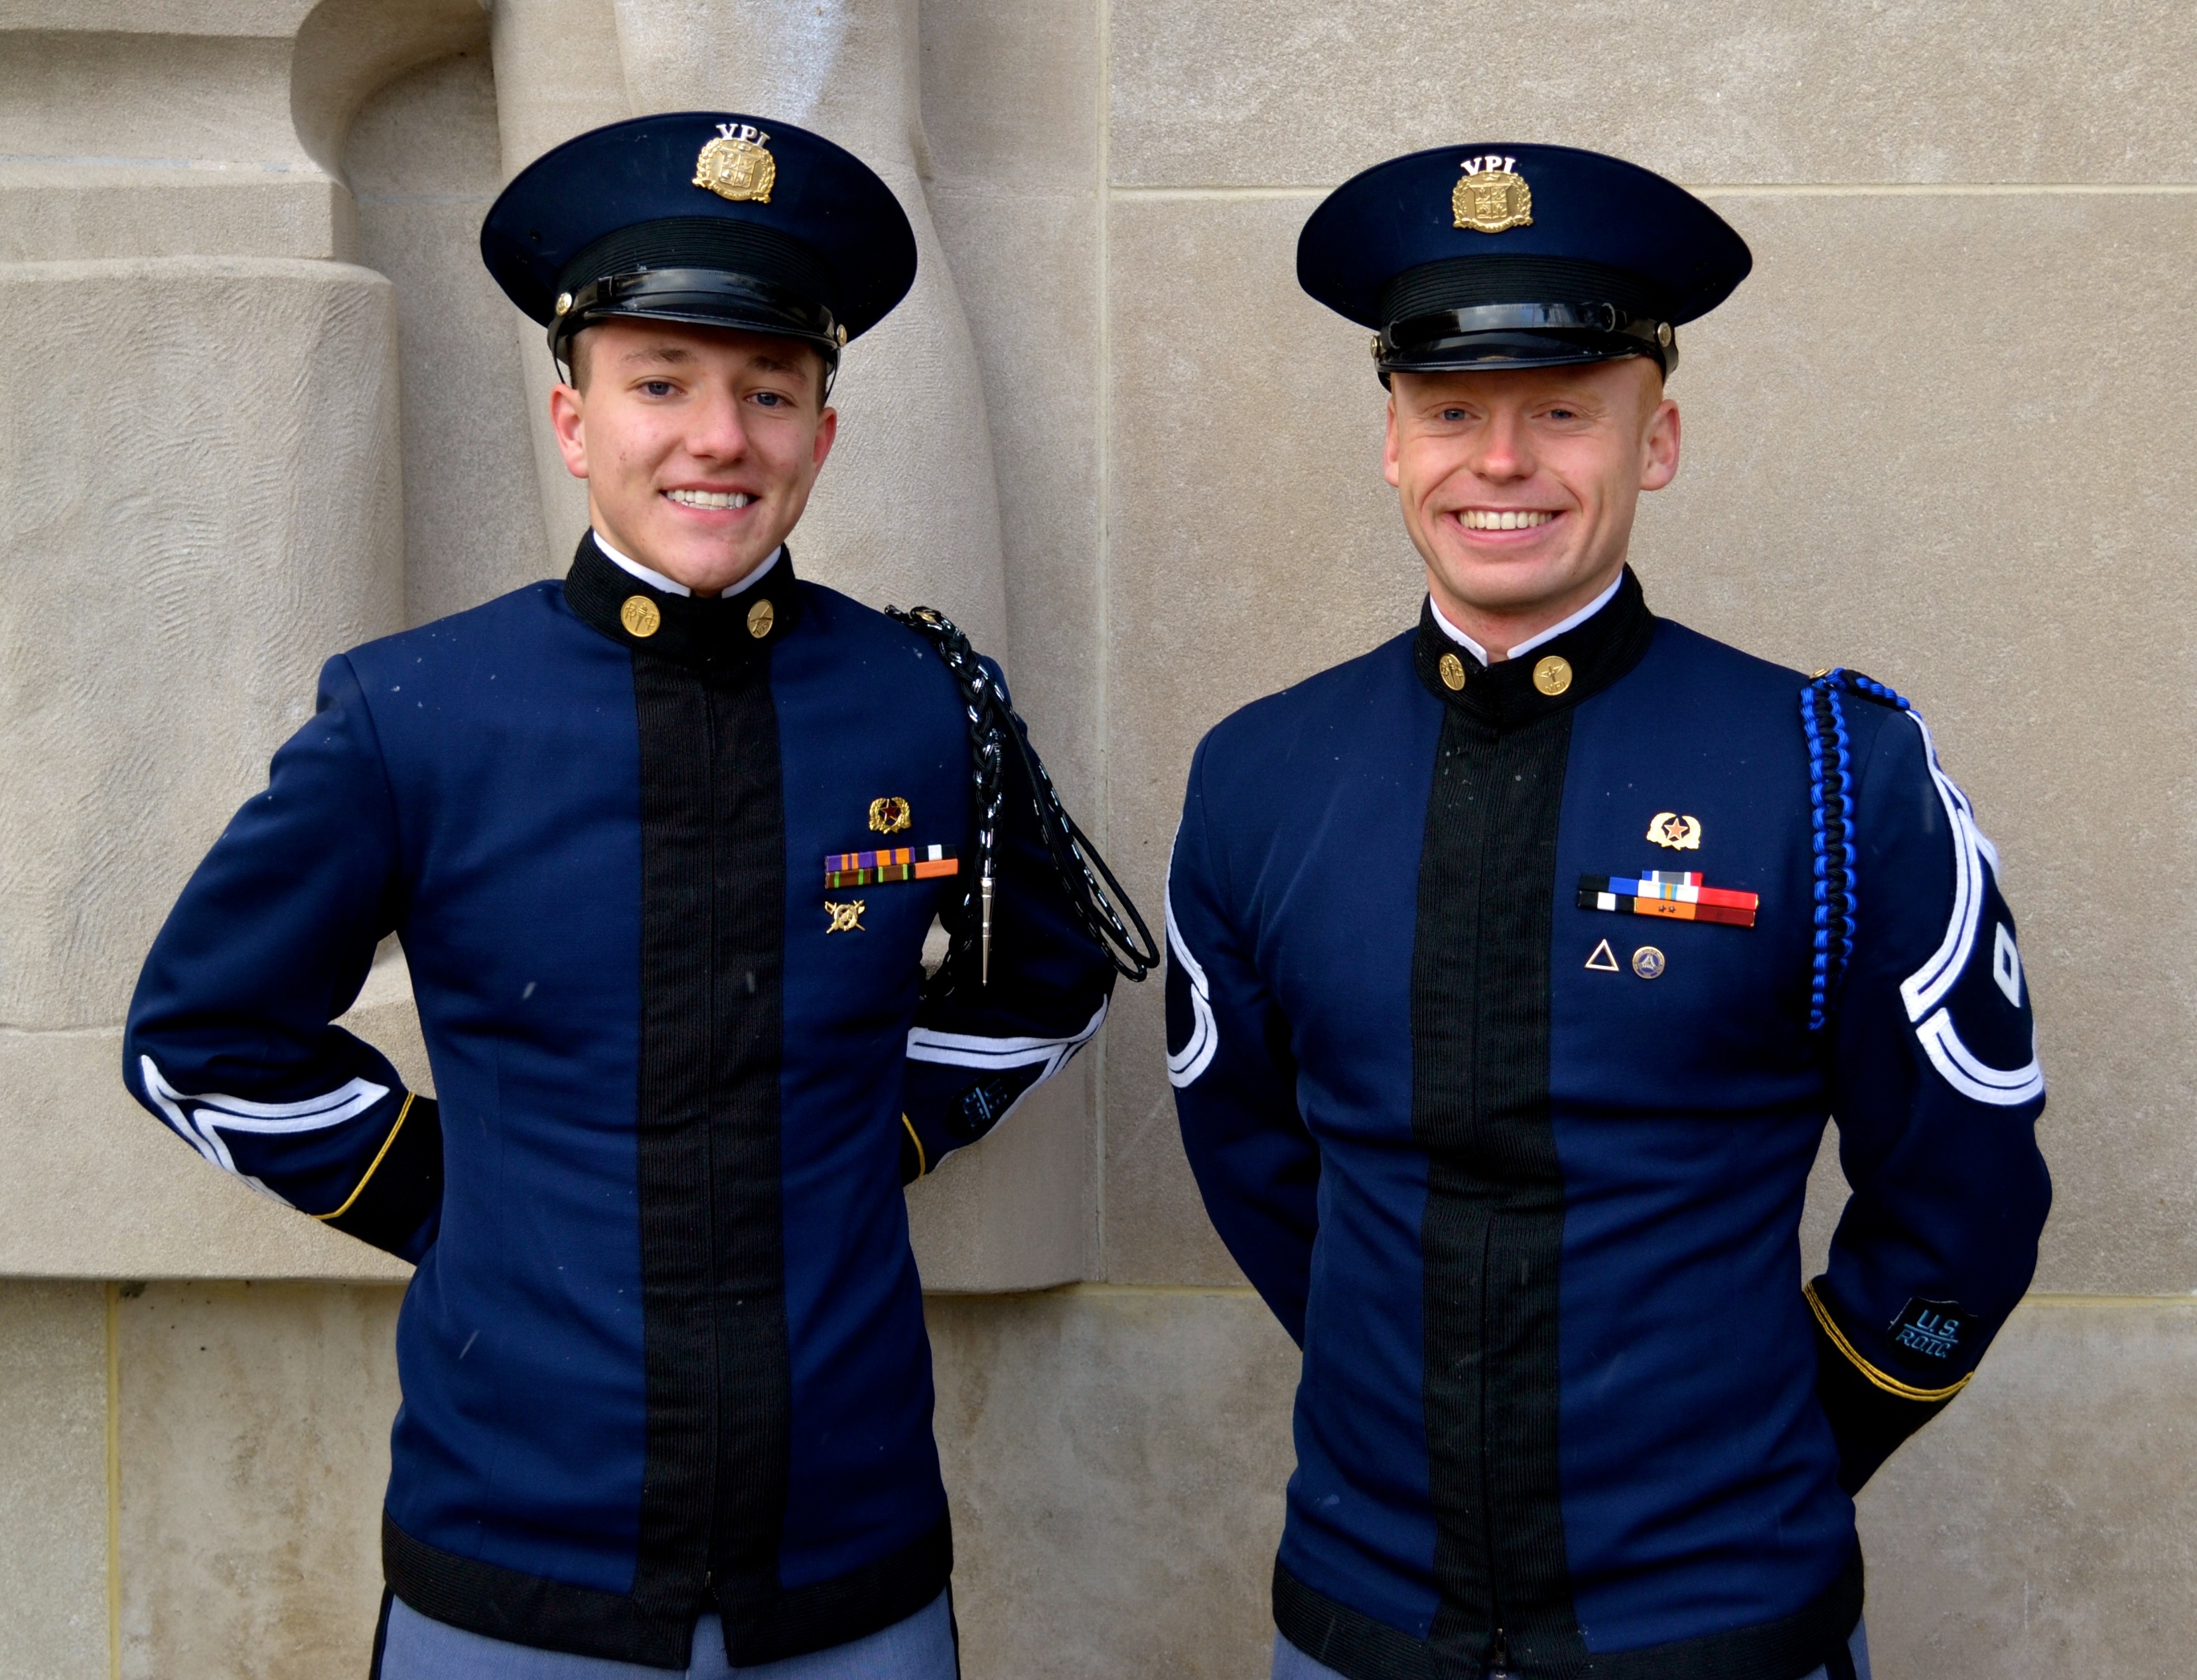 From left to right in front of the Pylons are Cadet Hunter Garth and Cadet Garrett Treaster.